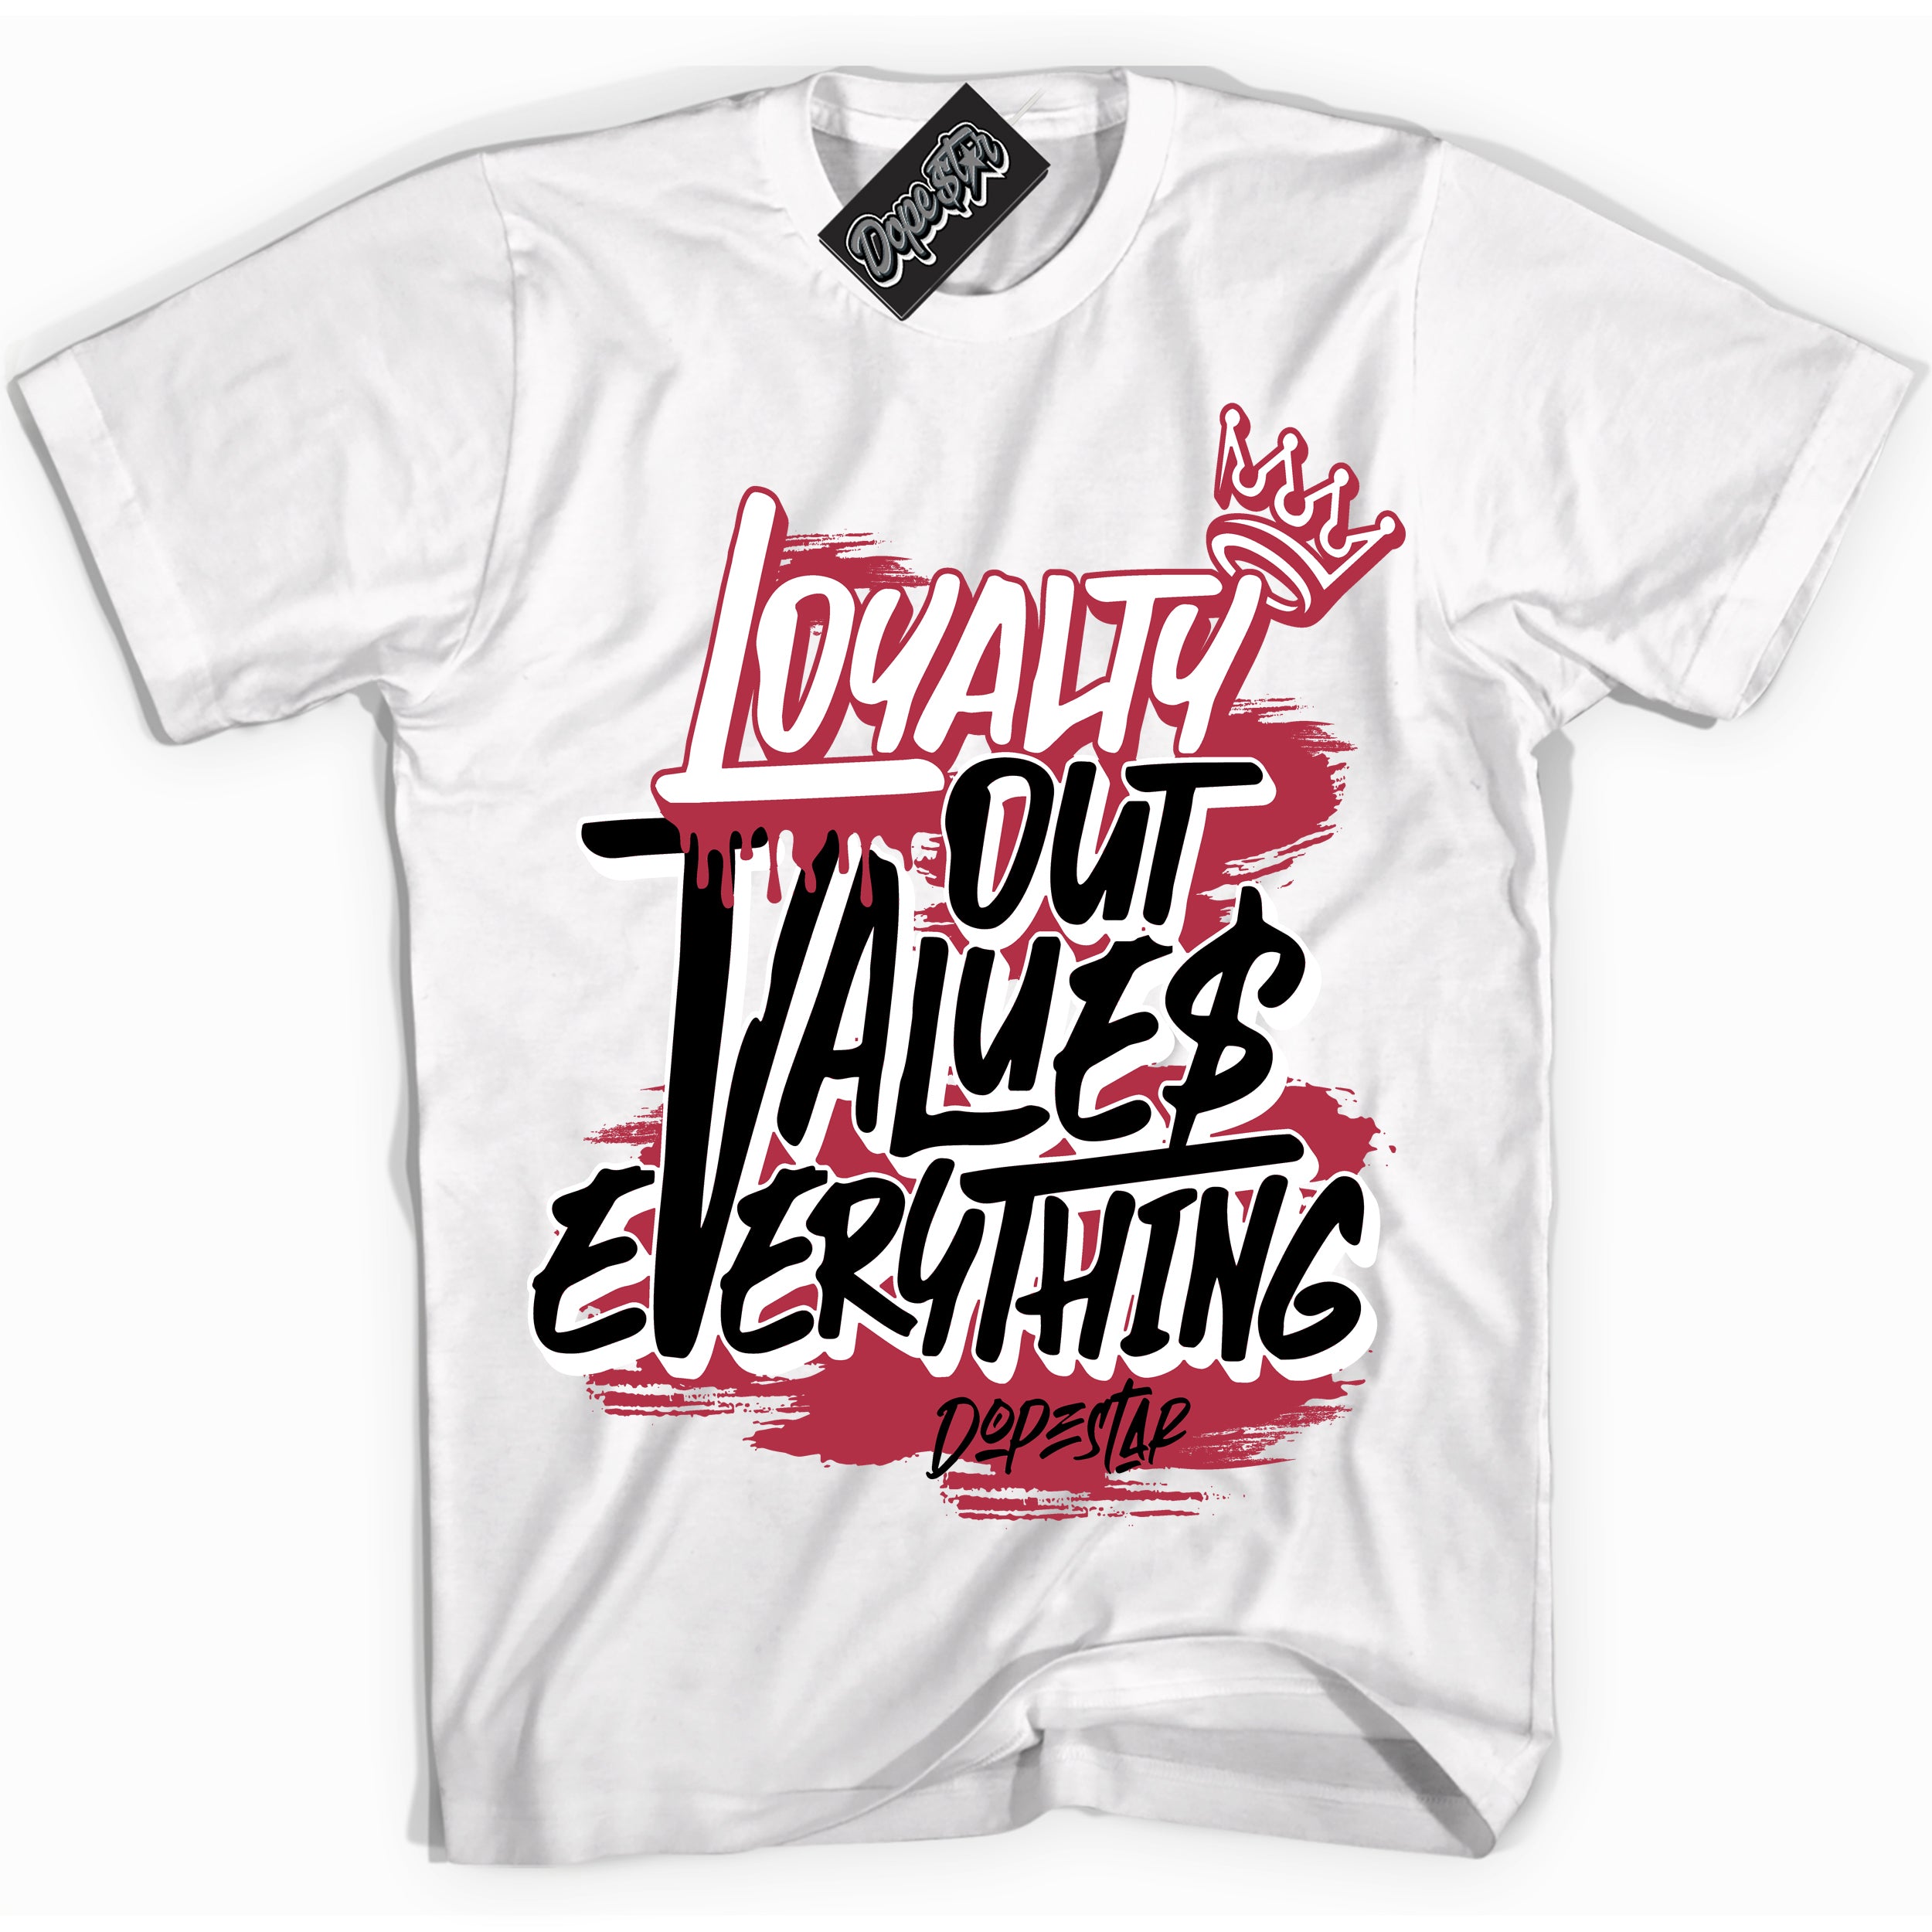 Cool White Shirt with “ Loyalty Out Values Everything” design that perfectly matches FlyEase Black White Fire Red 1s Sneakers.